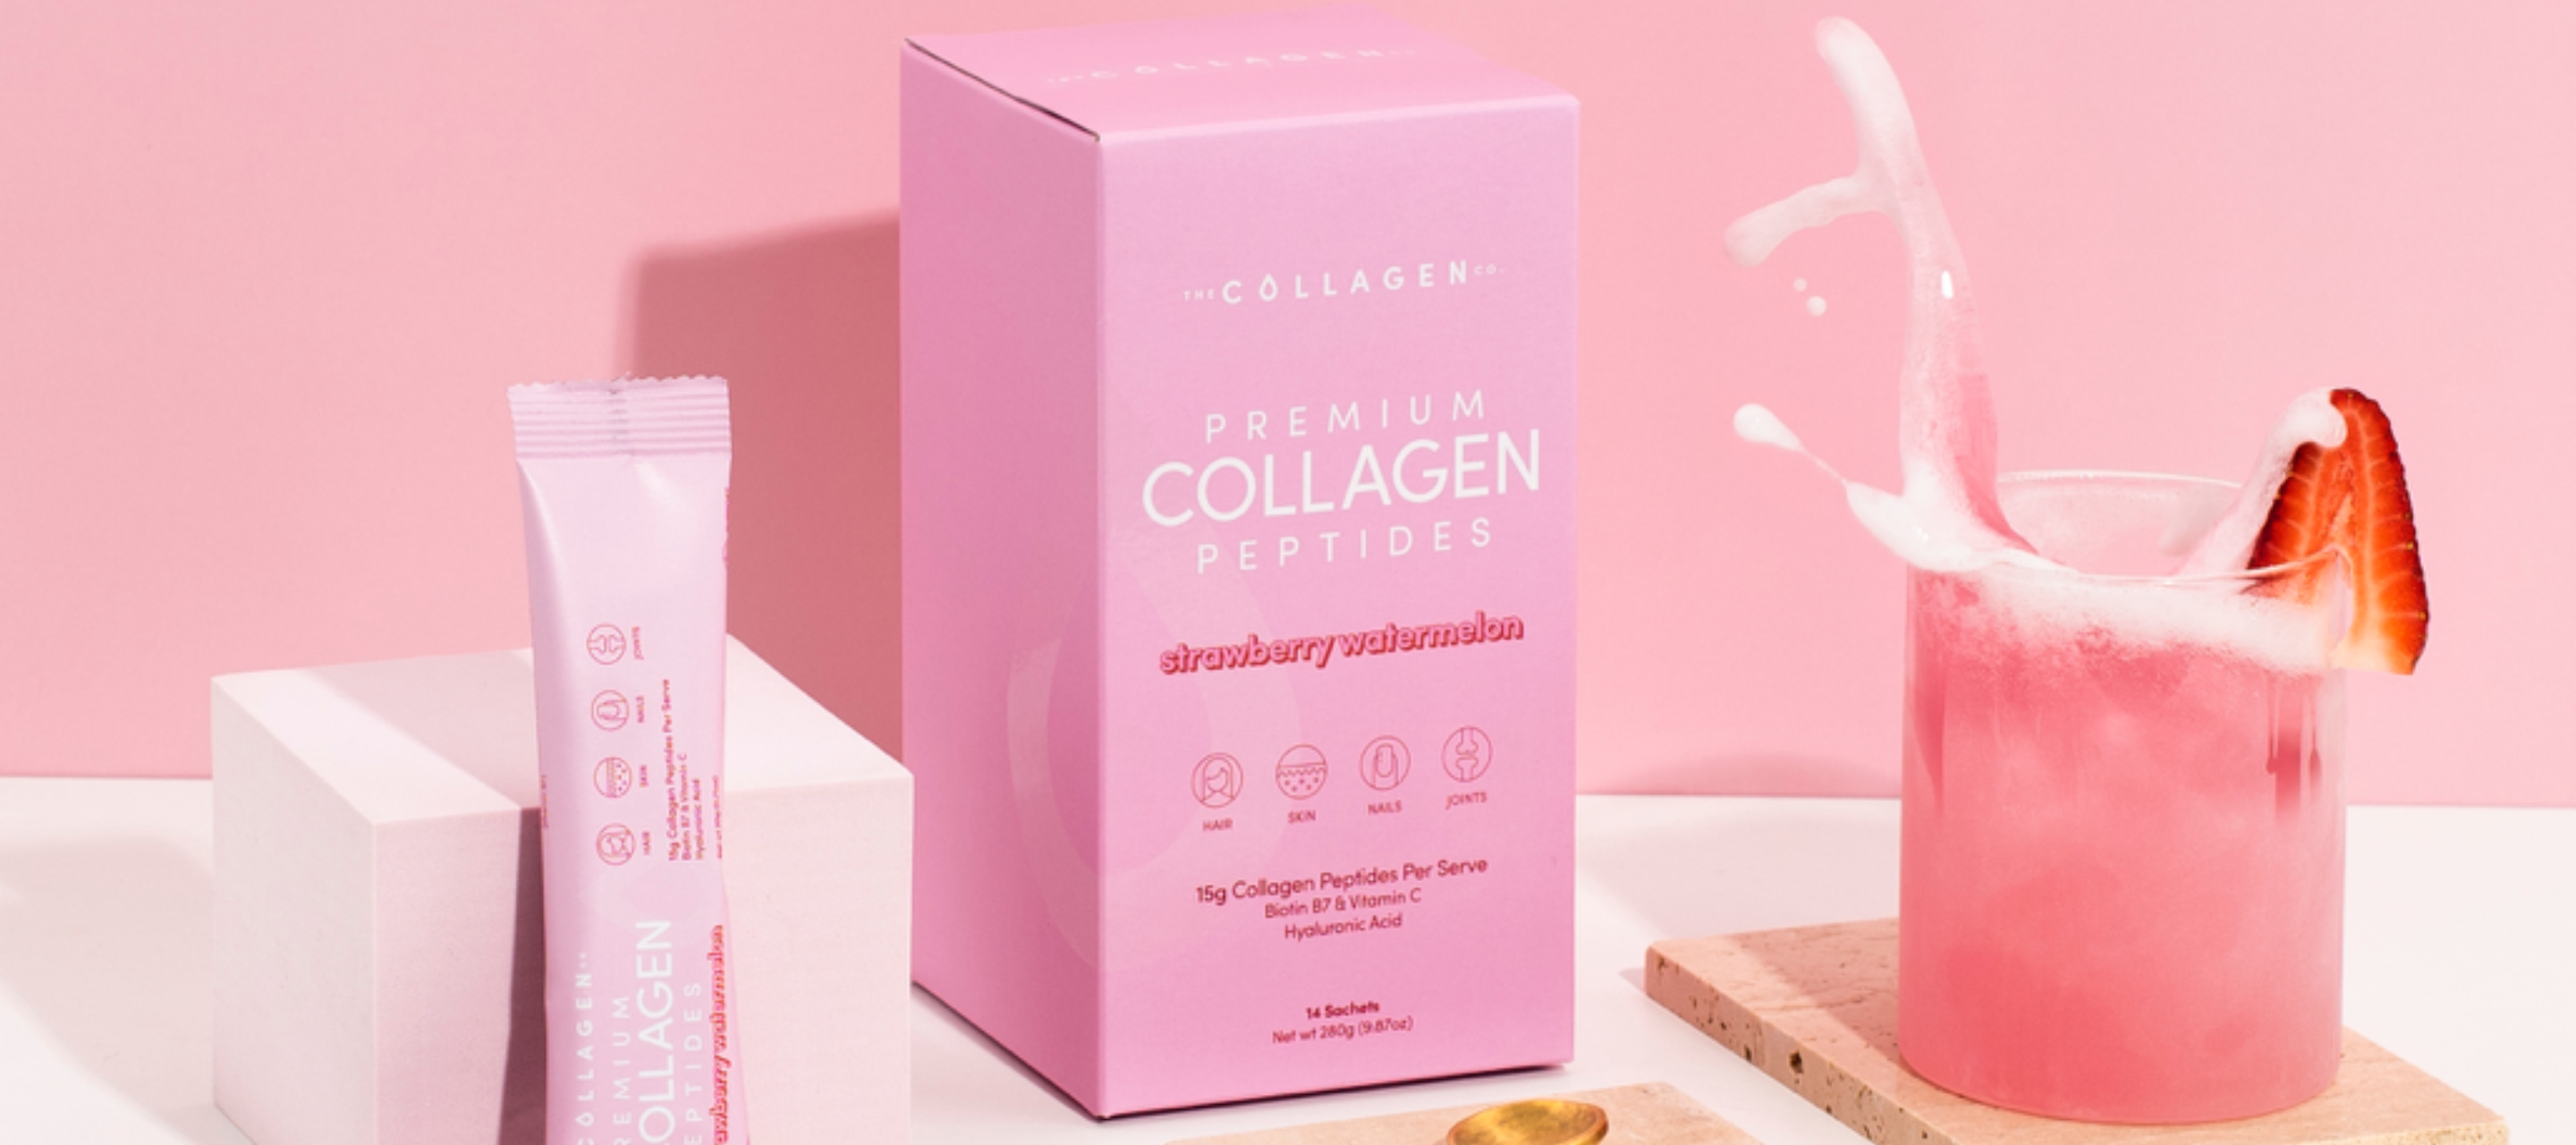 The Collagen Co Keeps More Than 50% of Customers Coming Back With Yotpo